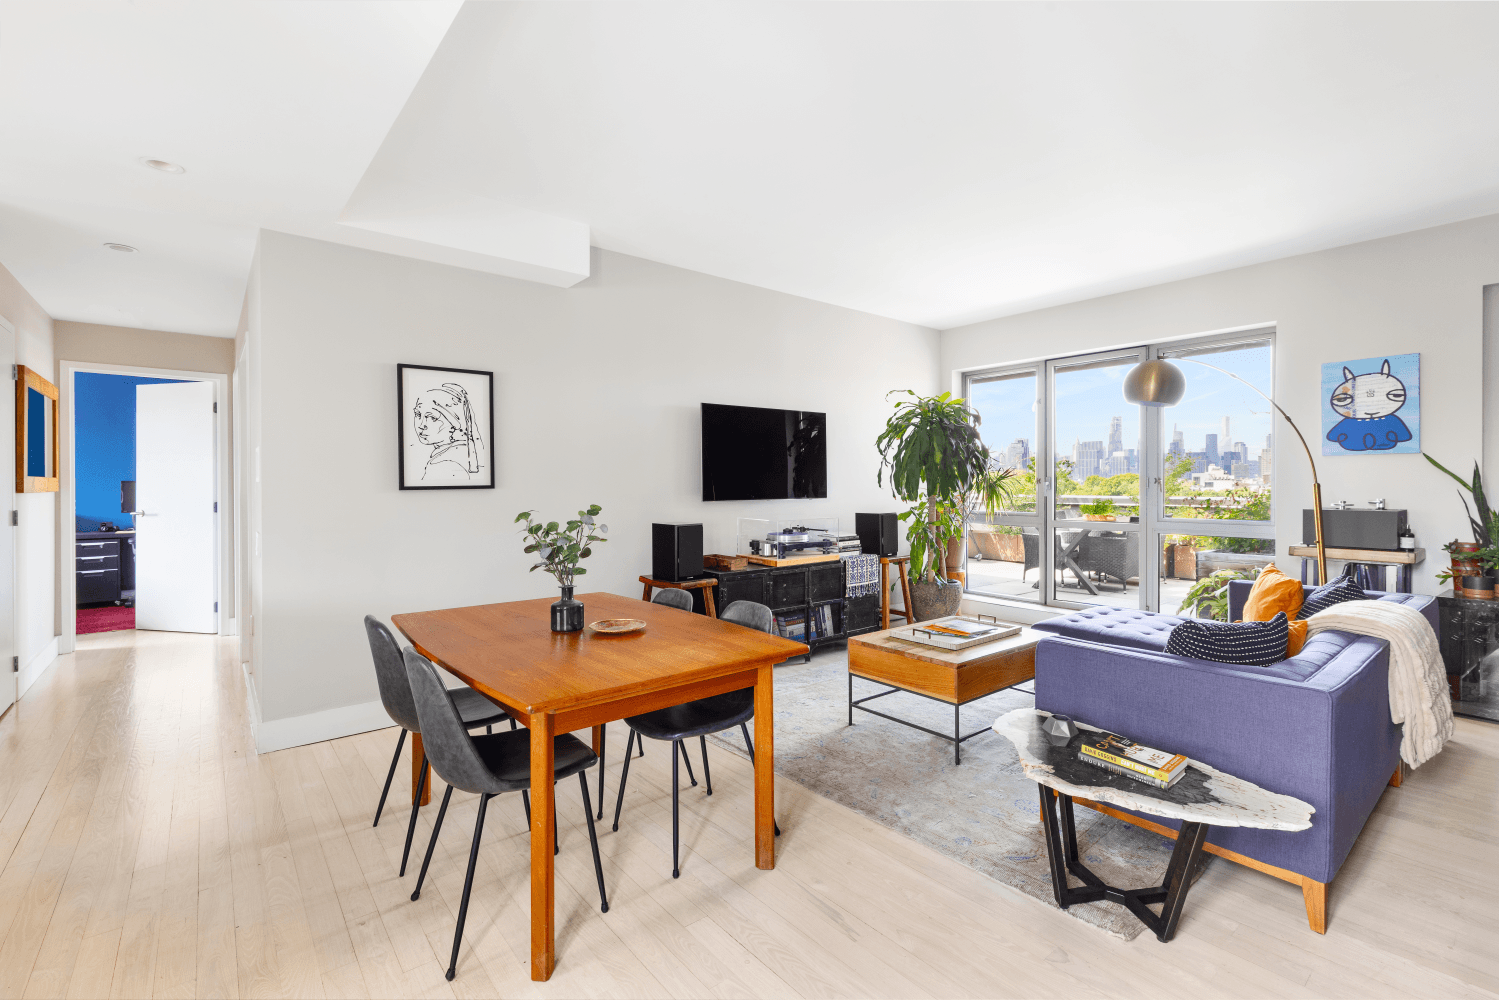 Welcome to your urban oasis at 415 Leonard Street a stunning 2 bedroom, 2 bathroom corner penthouse that redefines city living.